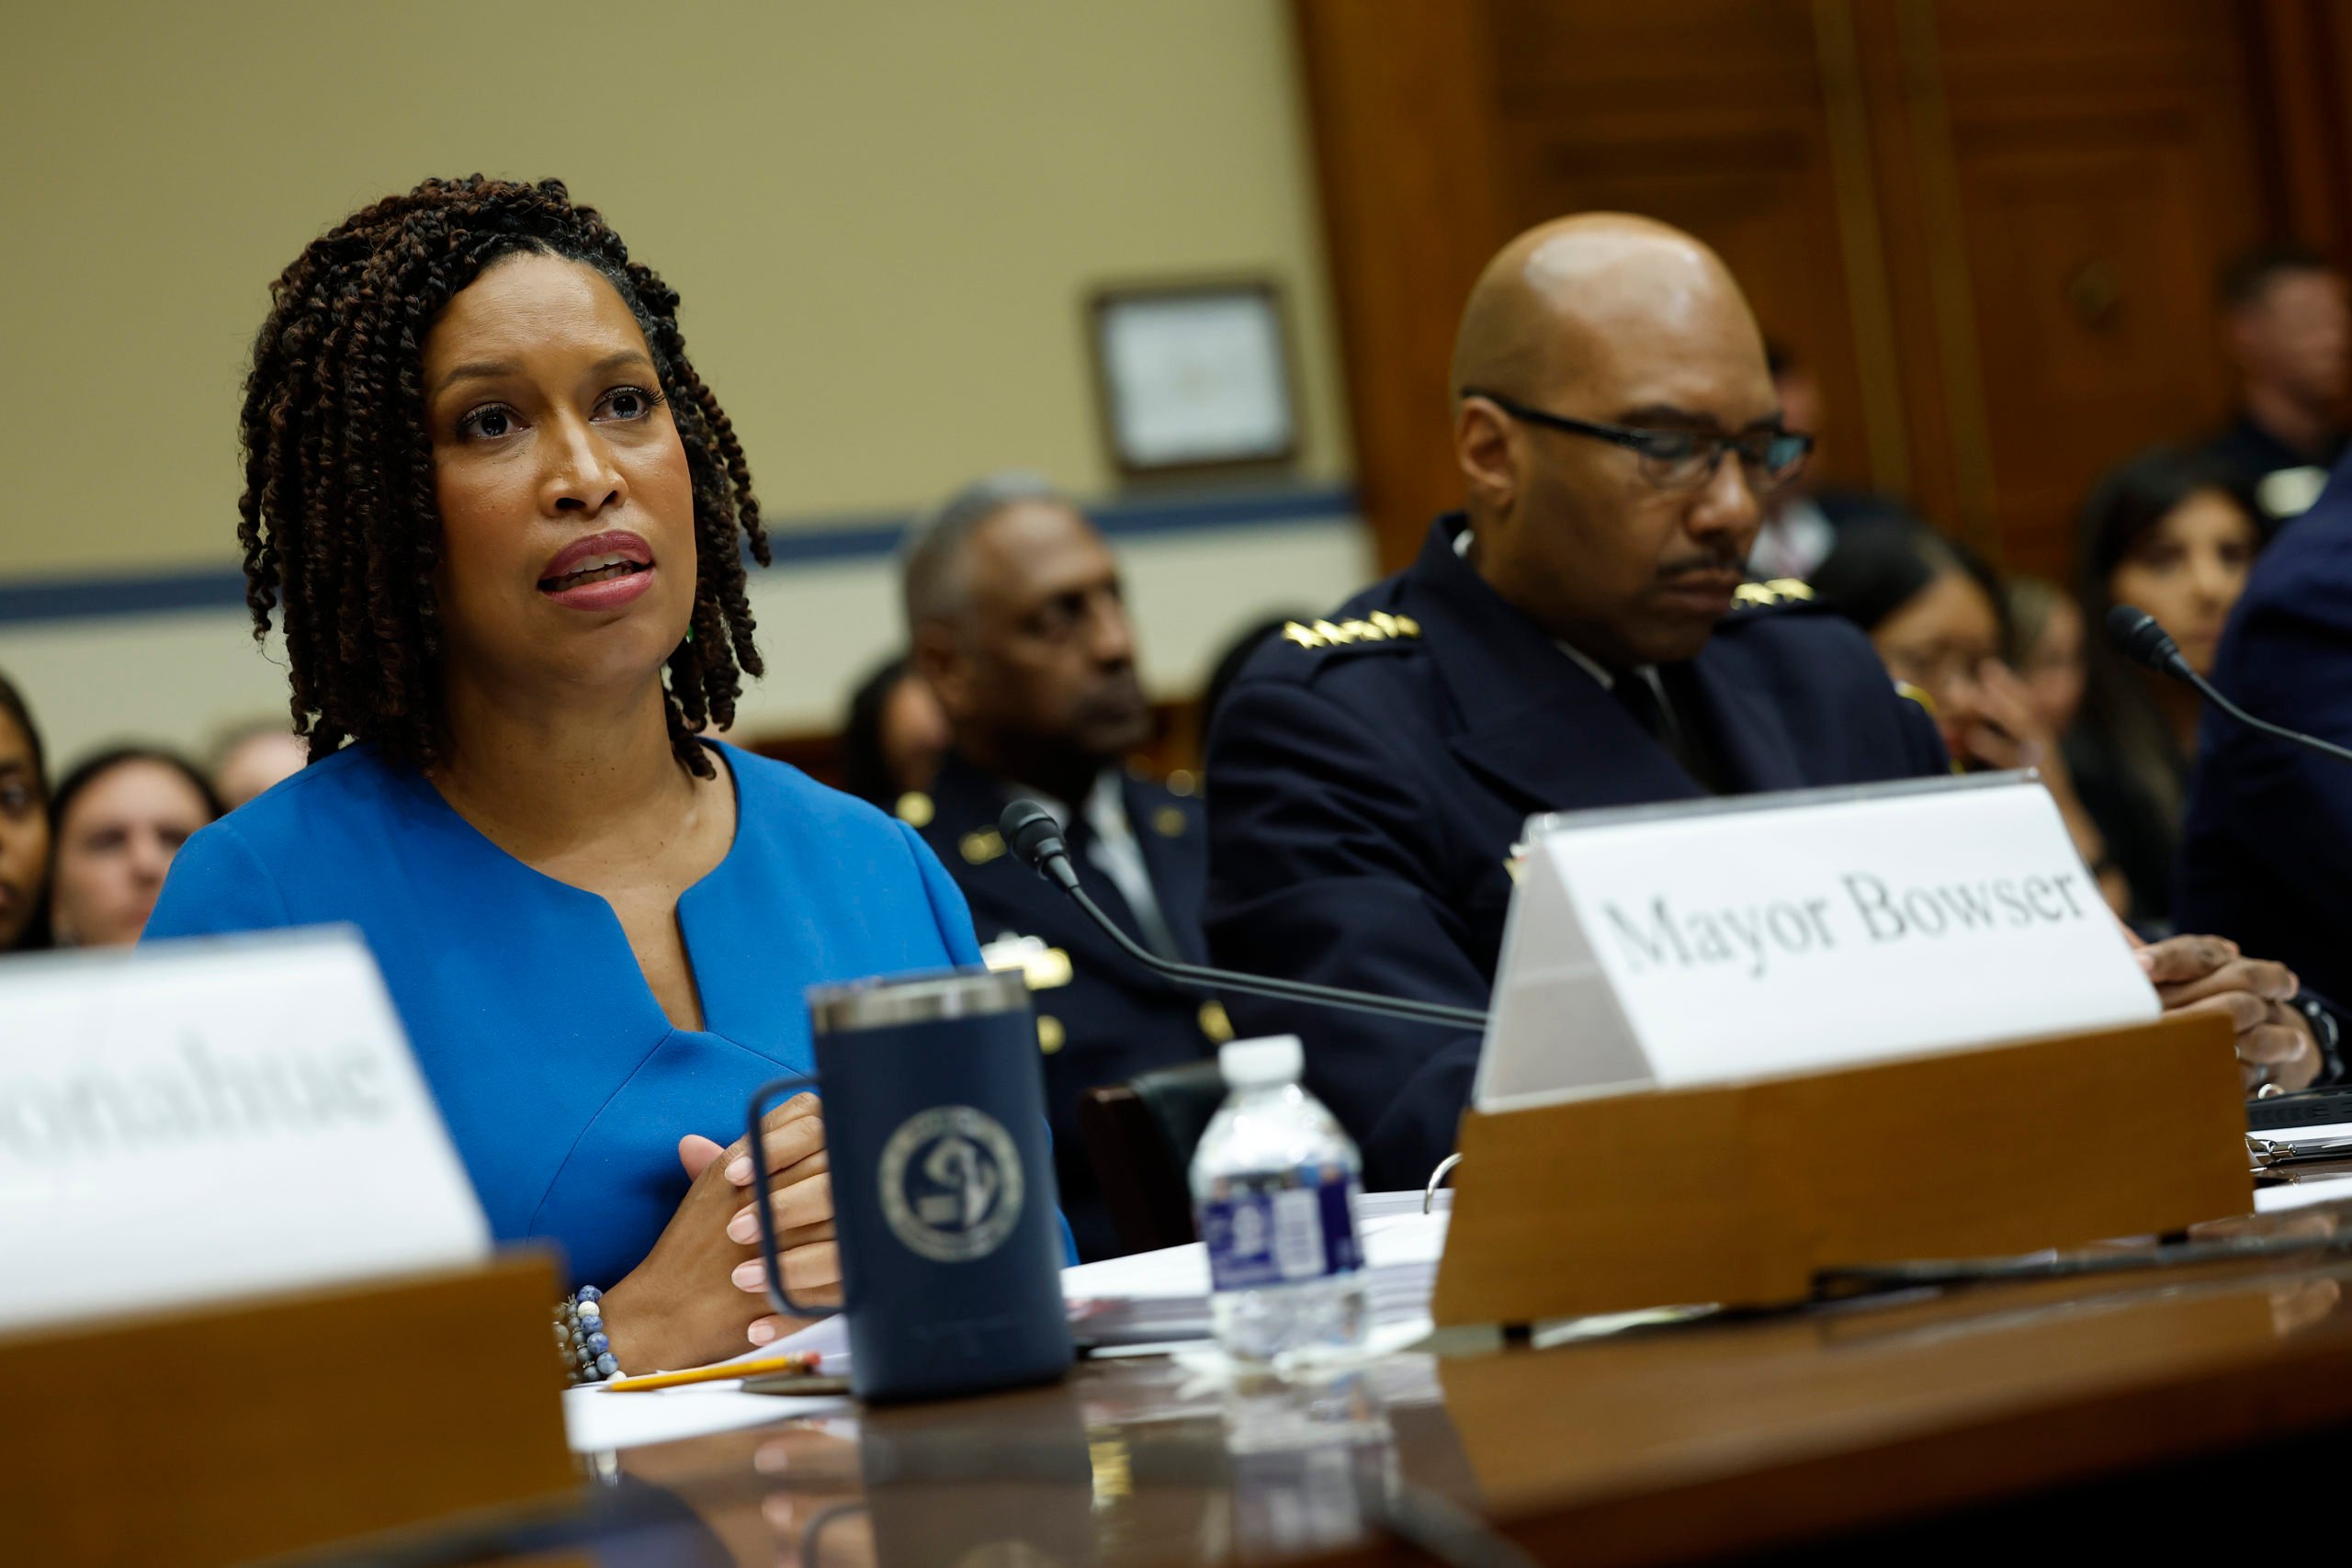 WASHINGTON, DC - MAY 16: Washington DC Mayor Muriel Bowser and outgoing Washington, DC Chief of Police Robert Conte testify before the House Oversight and Accountability Committee in the Rayburn House Office Building on May 16, 2023 in Washington, DC. The committee held an oversight hearing on Washington, D.C. (Photo by Kevin Dietsch/Getty Images)